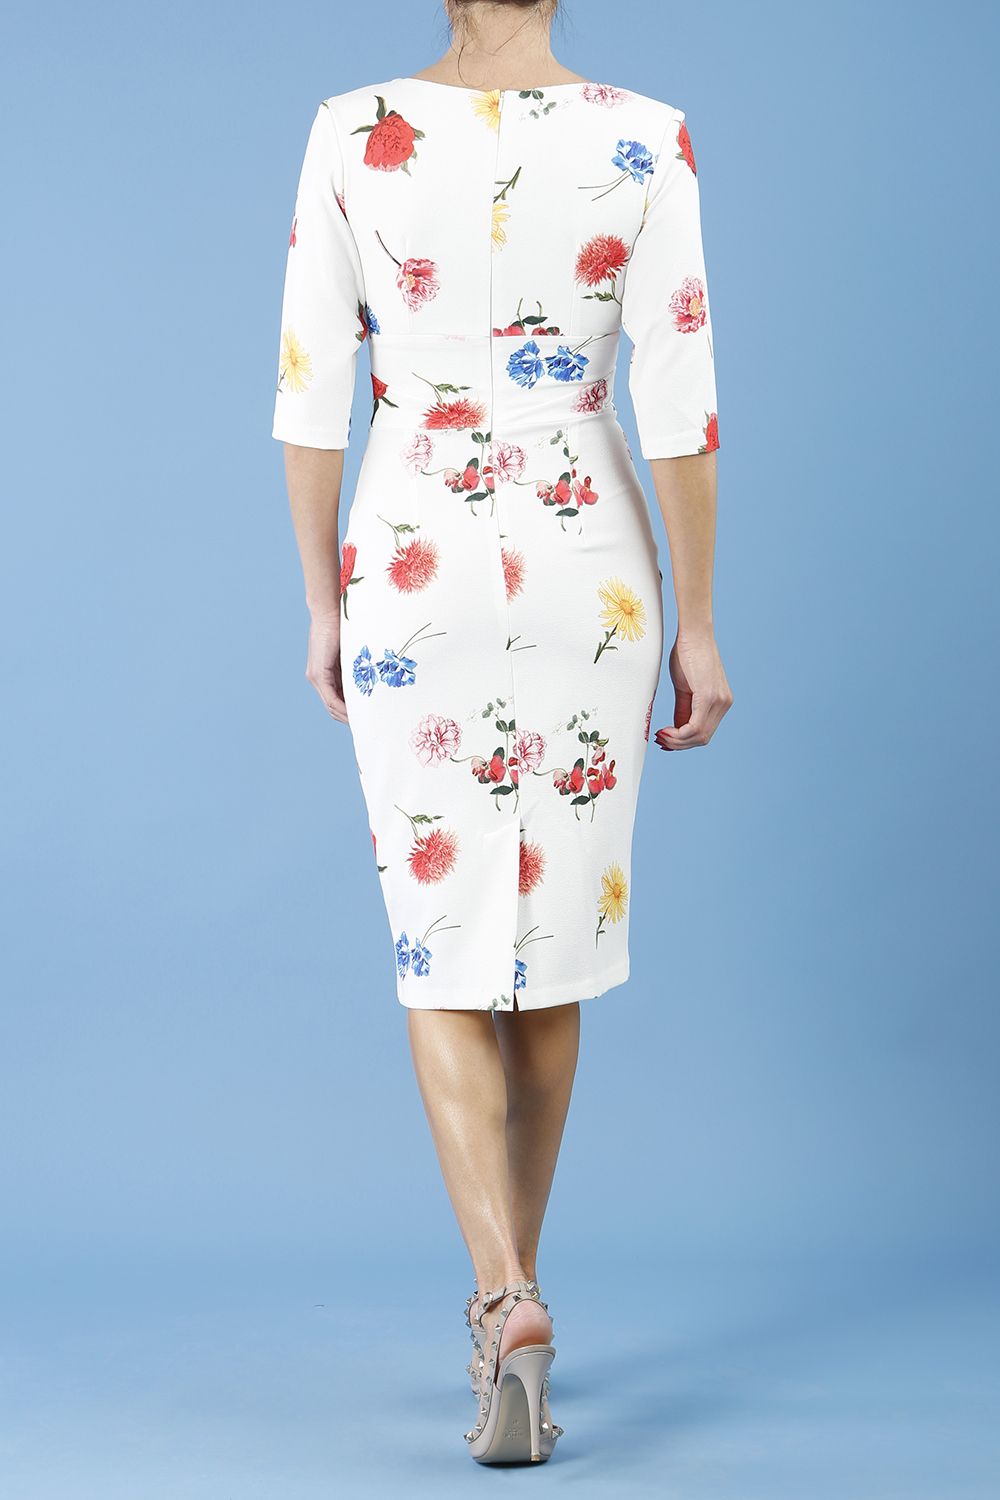 Model wearing the Diva Cynthia Floral Print dress with pleating across the front in buttercup print back